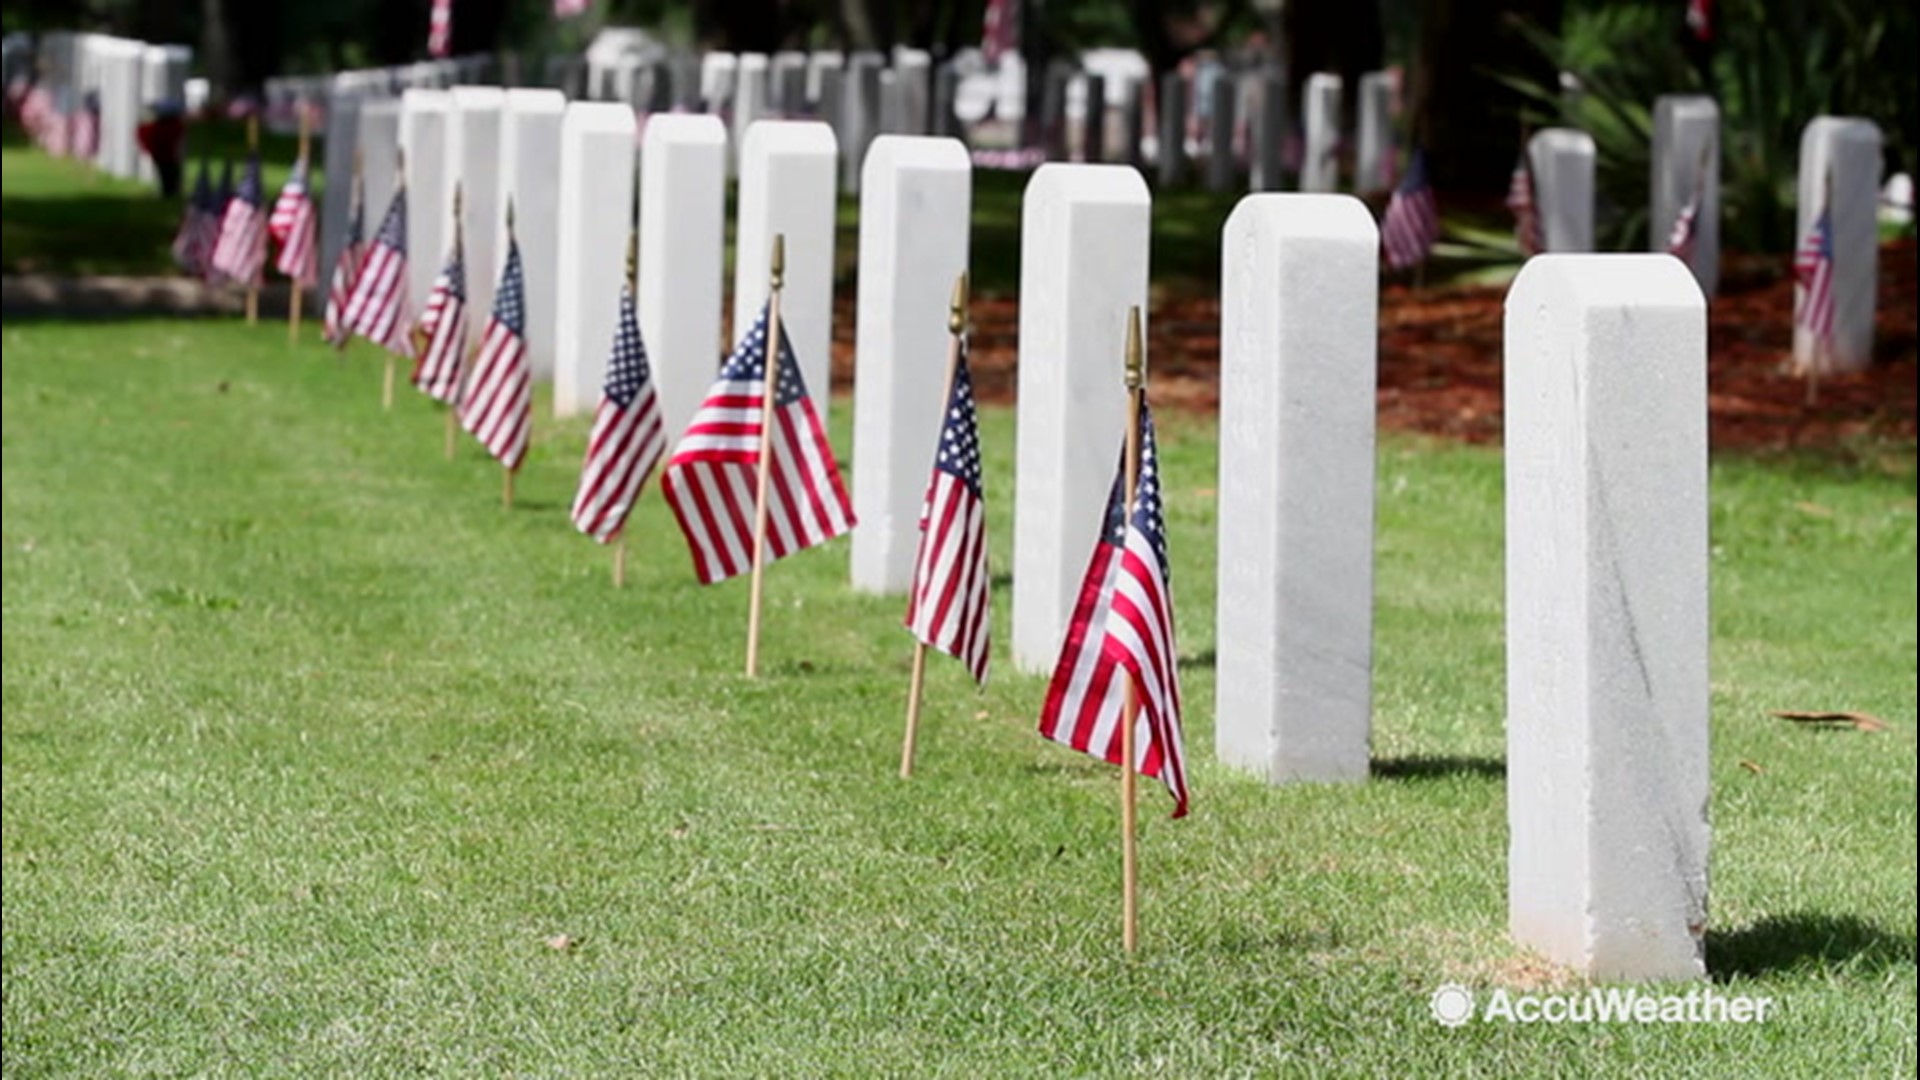 Even though Memorial, Veterans and Armed Forces Day all celebrate the U.S. Military, there is a difference between the three that you may not realize.